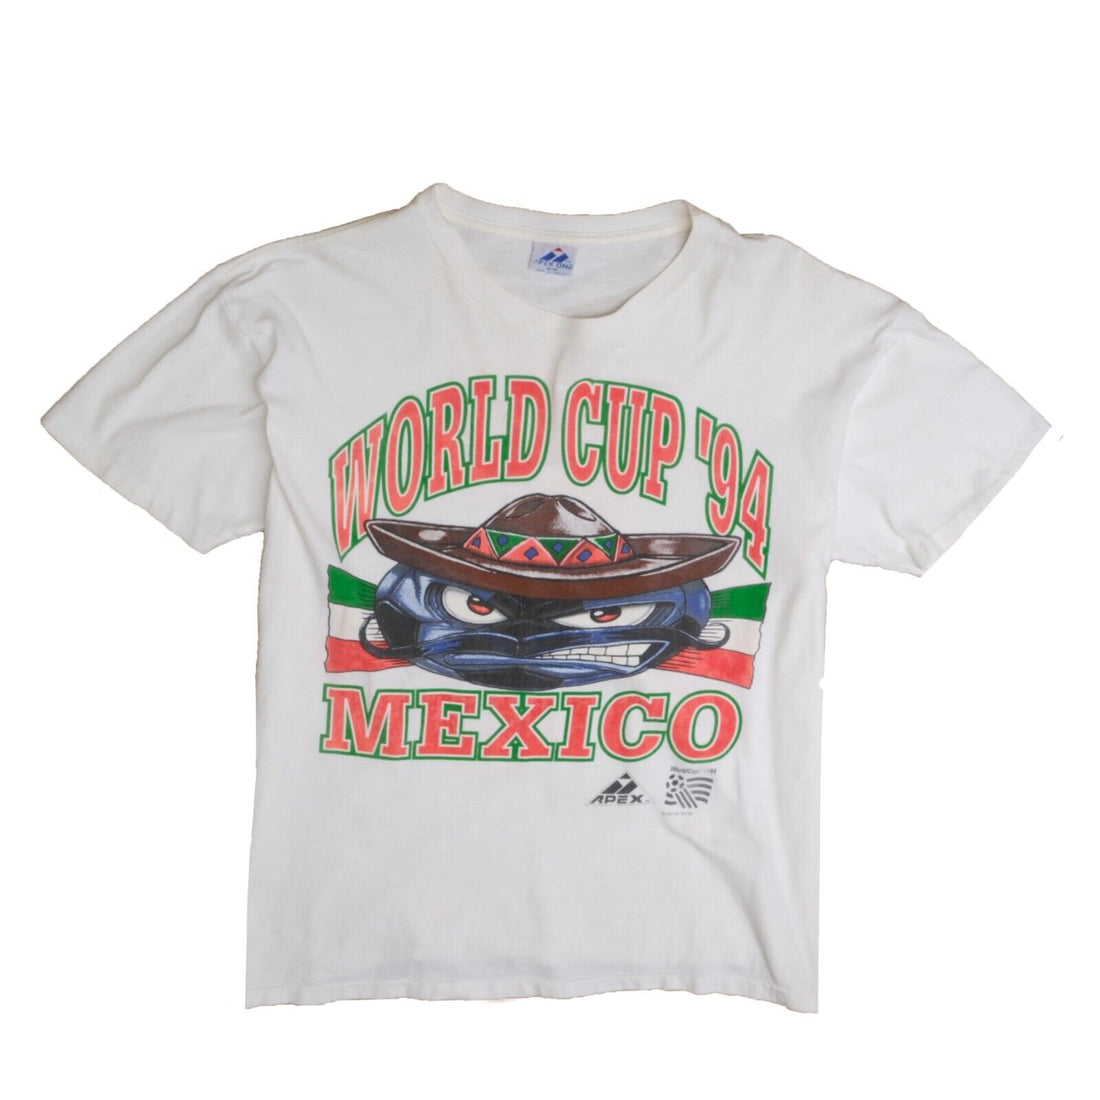 Vintage World Cup Mexico Apex One T-Shirt Size Medium Soccer 1994 90s FIFA